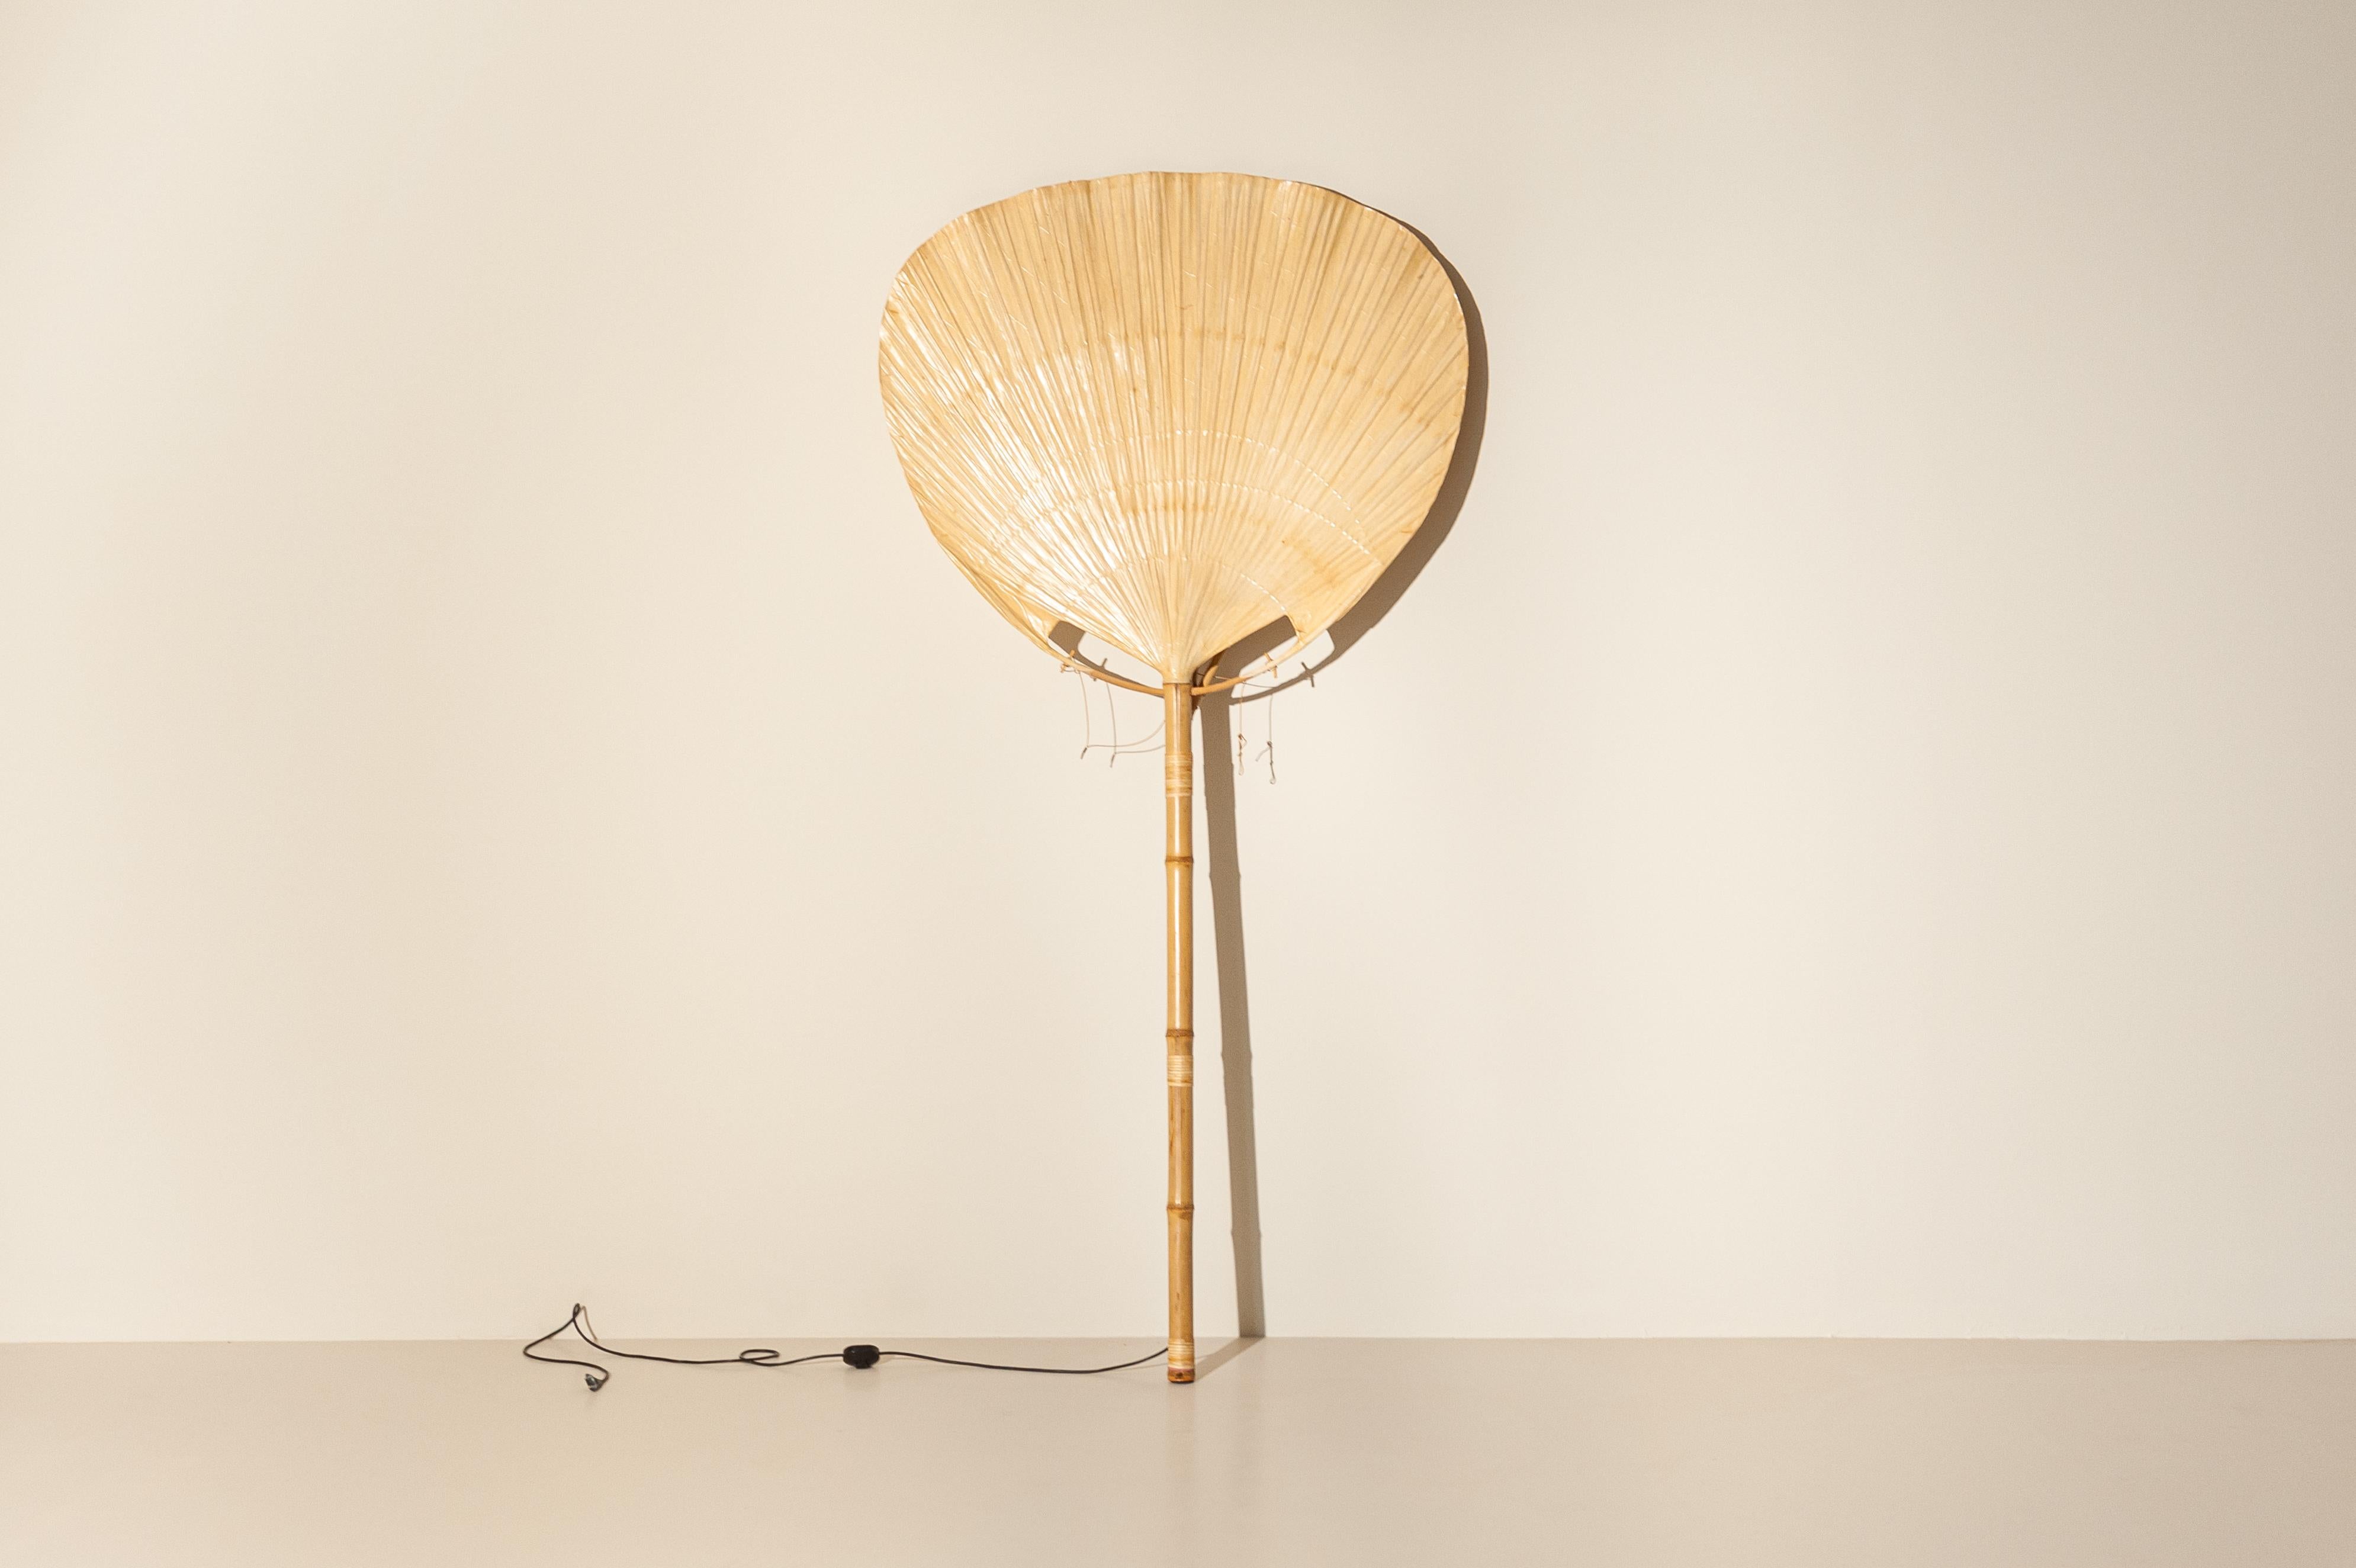 Large and rare Uchiwa bamboo floor lamp or wall lamp by Ingo Maurer for Design M, 1970s, Germany. 

Ingo Maurer's interest in rice paper for lampshades brought him to design and produce various models inspired by traditional Japanese fans during the